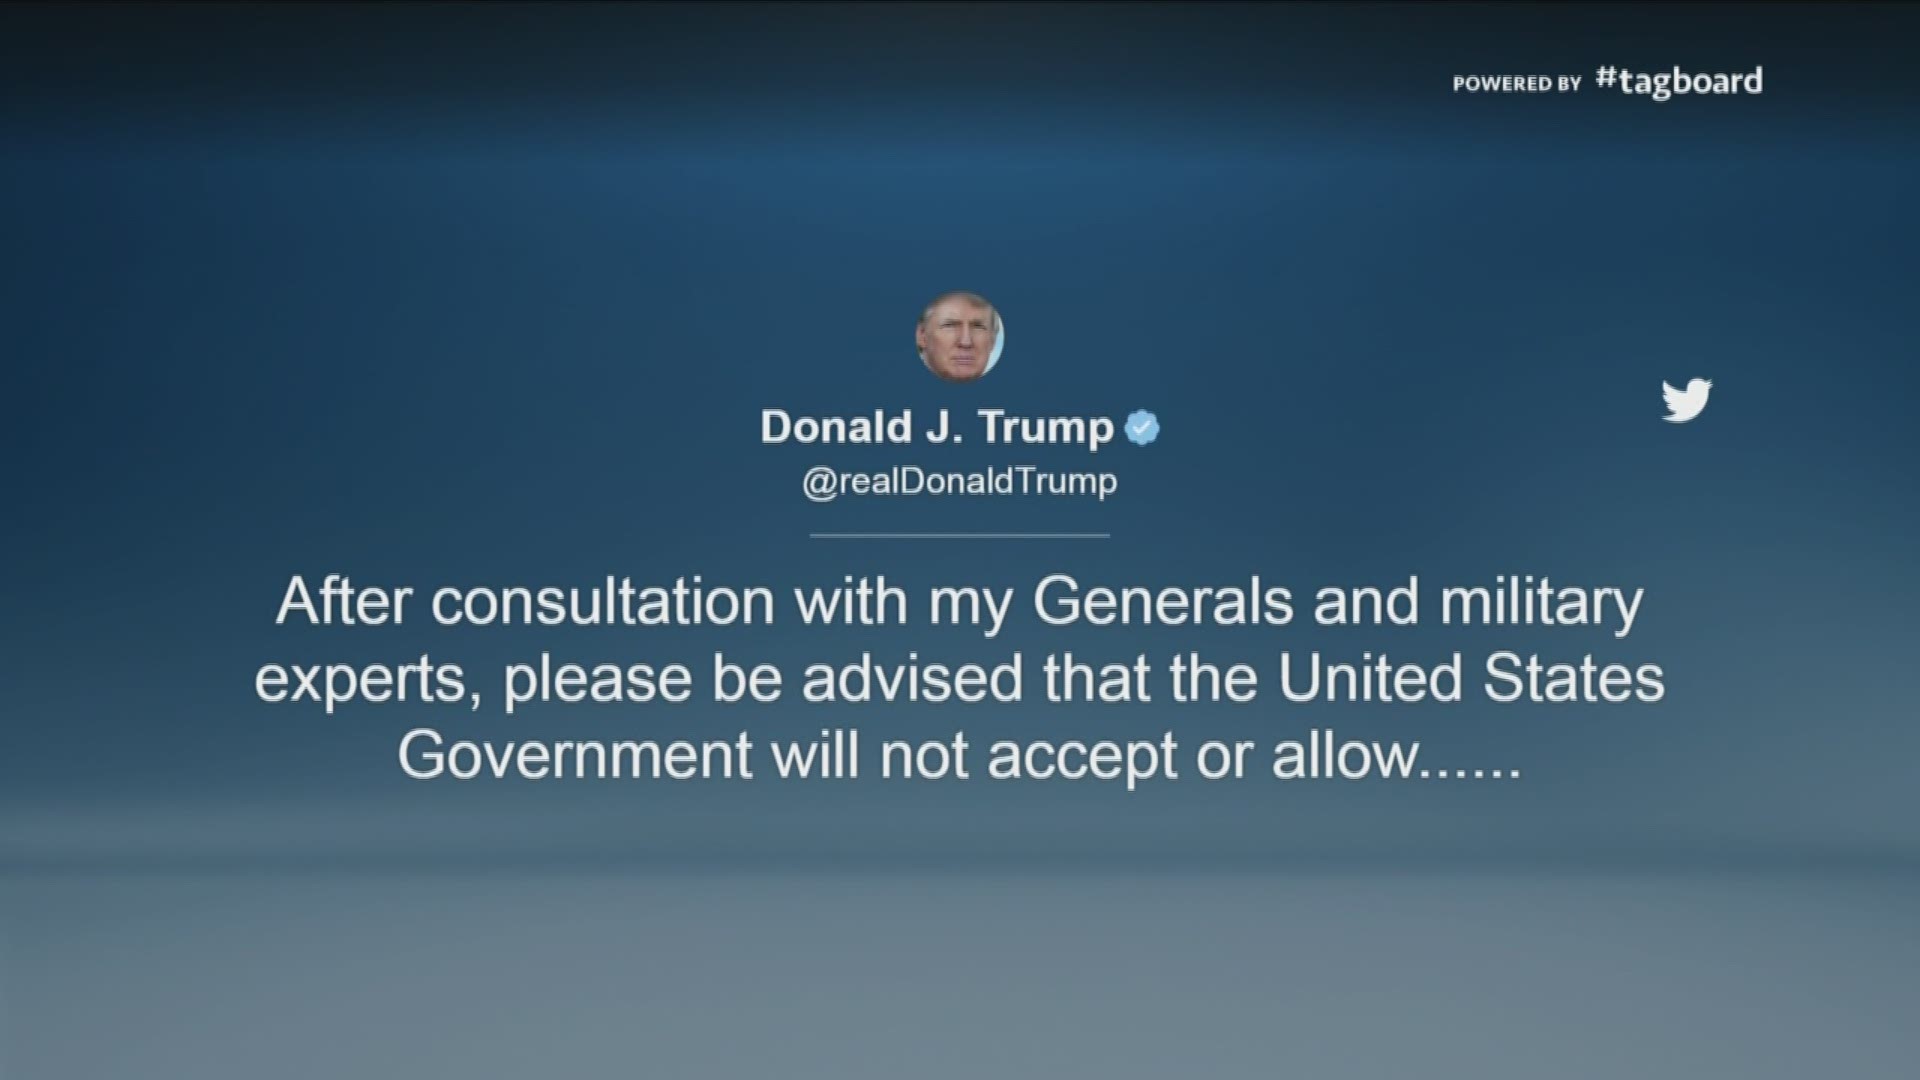 President Donald Trump sent out the statement via Twitter on Wednesday morning. (July 26, 2017)